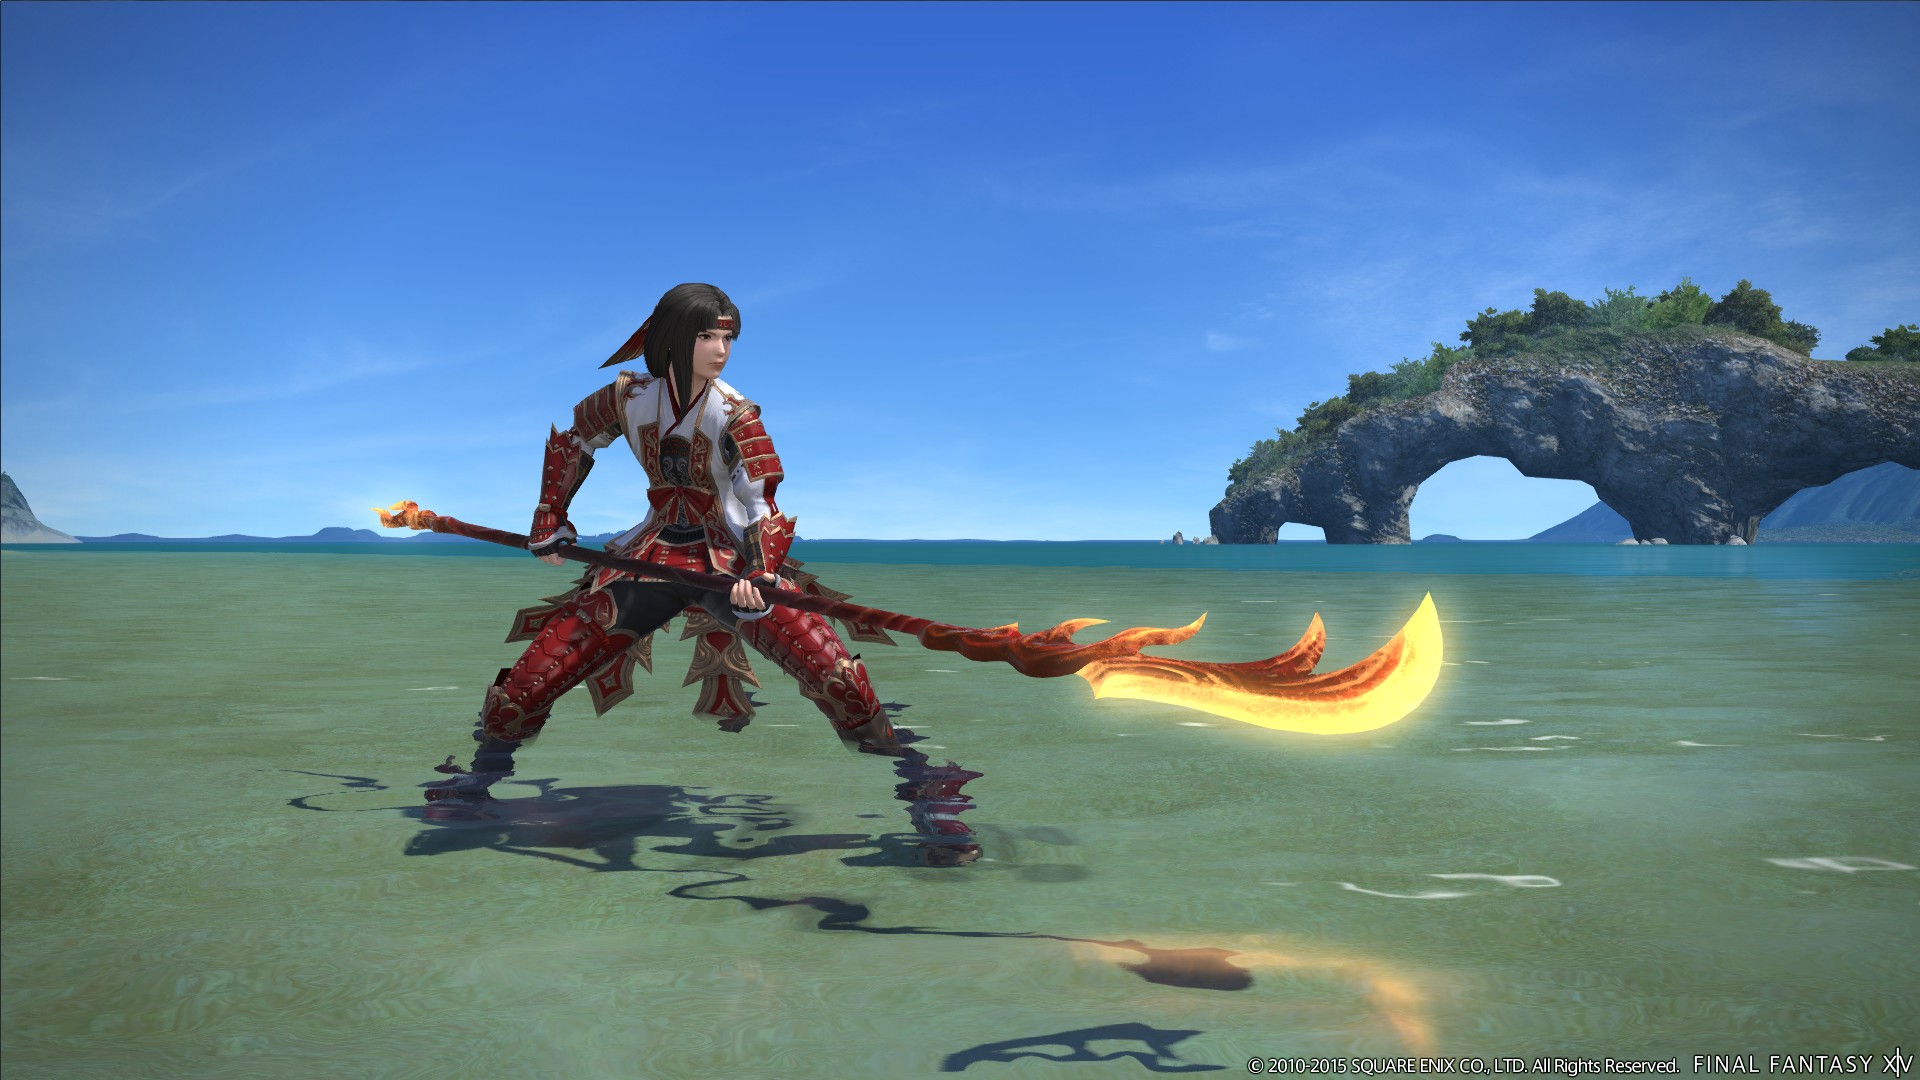 Final Fantasy XIV and Final Fantasy XI are teaming up once again with a new...